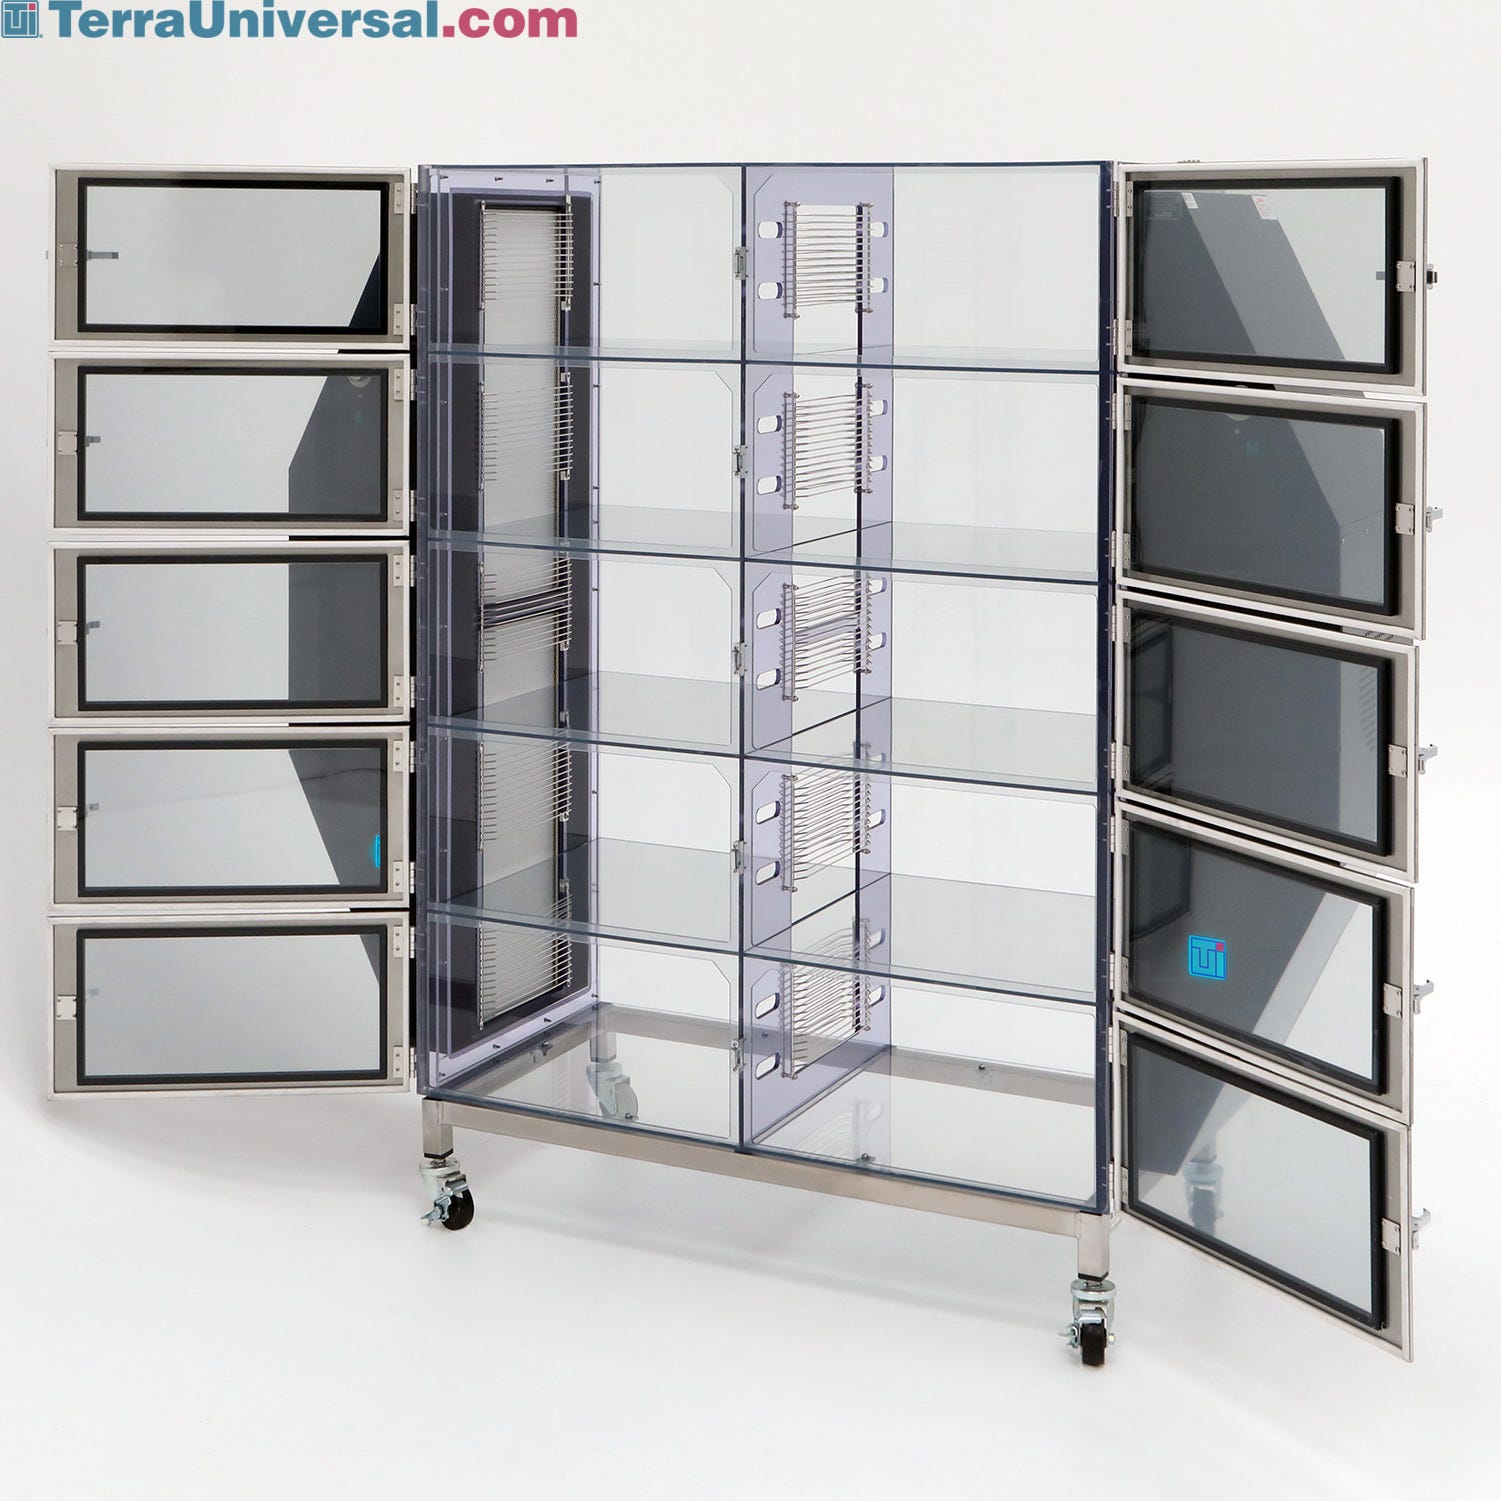 16 Height Terra Universal 4005-22 Wafer Boat Organizer 7.5 Length 16 Wide Acrylic 